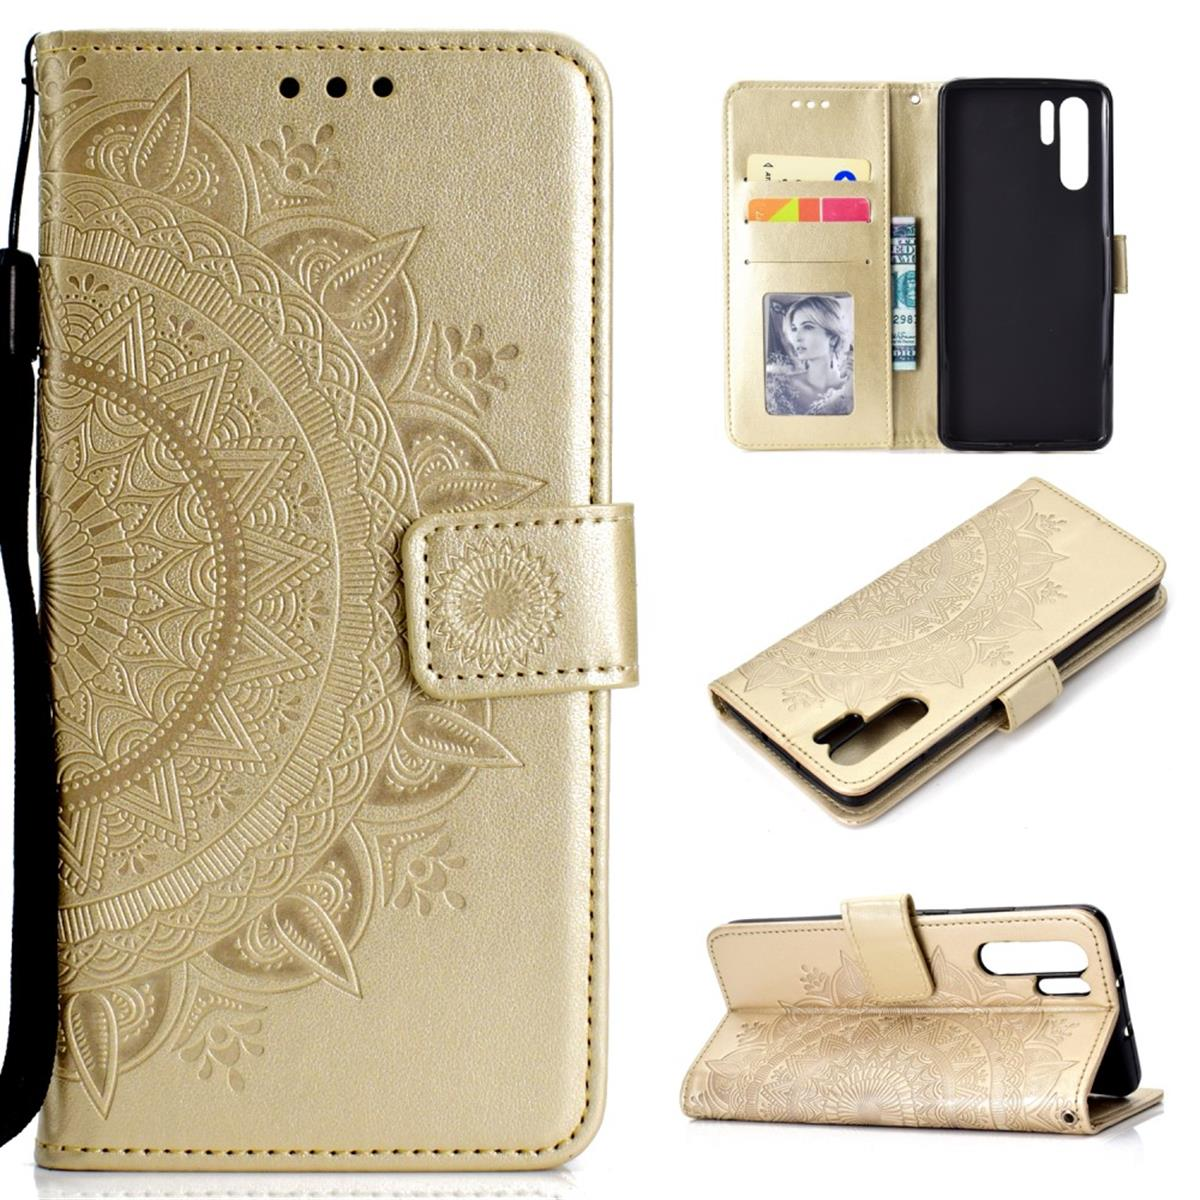 COVERKINGZ Klapphülle mit Huawei, Mandala Bookcover, Pro, P30 Muster, Gold